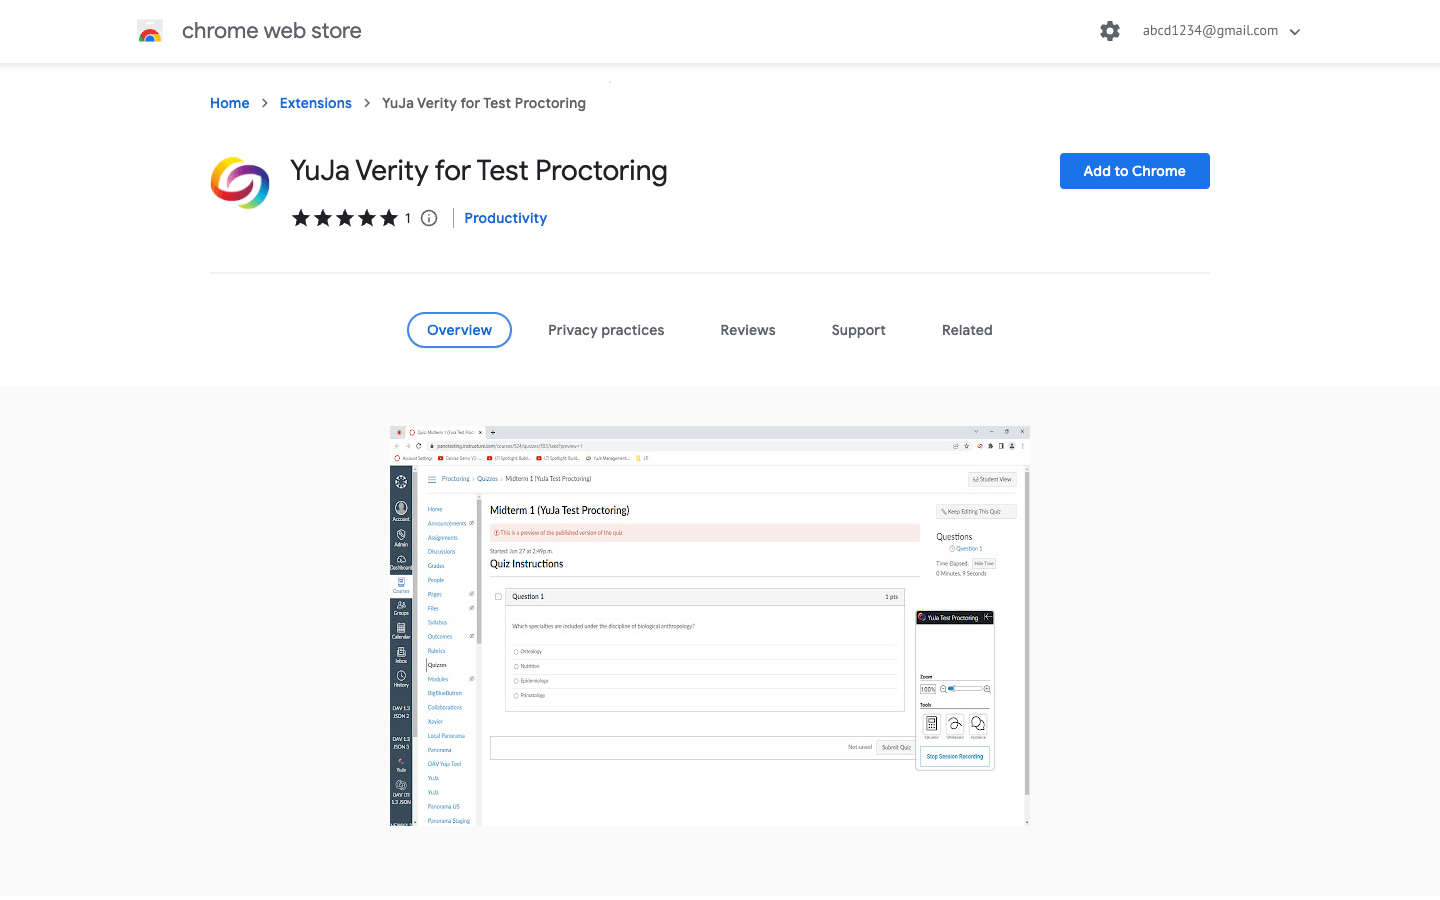 YuJa Verity for Test Proctoring Extension in the Chrome Web Store